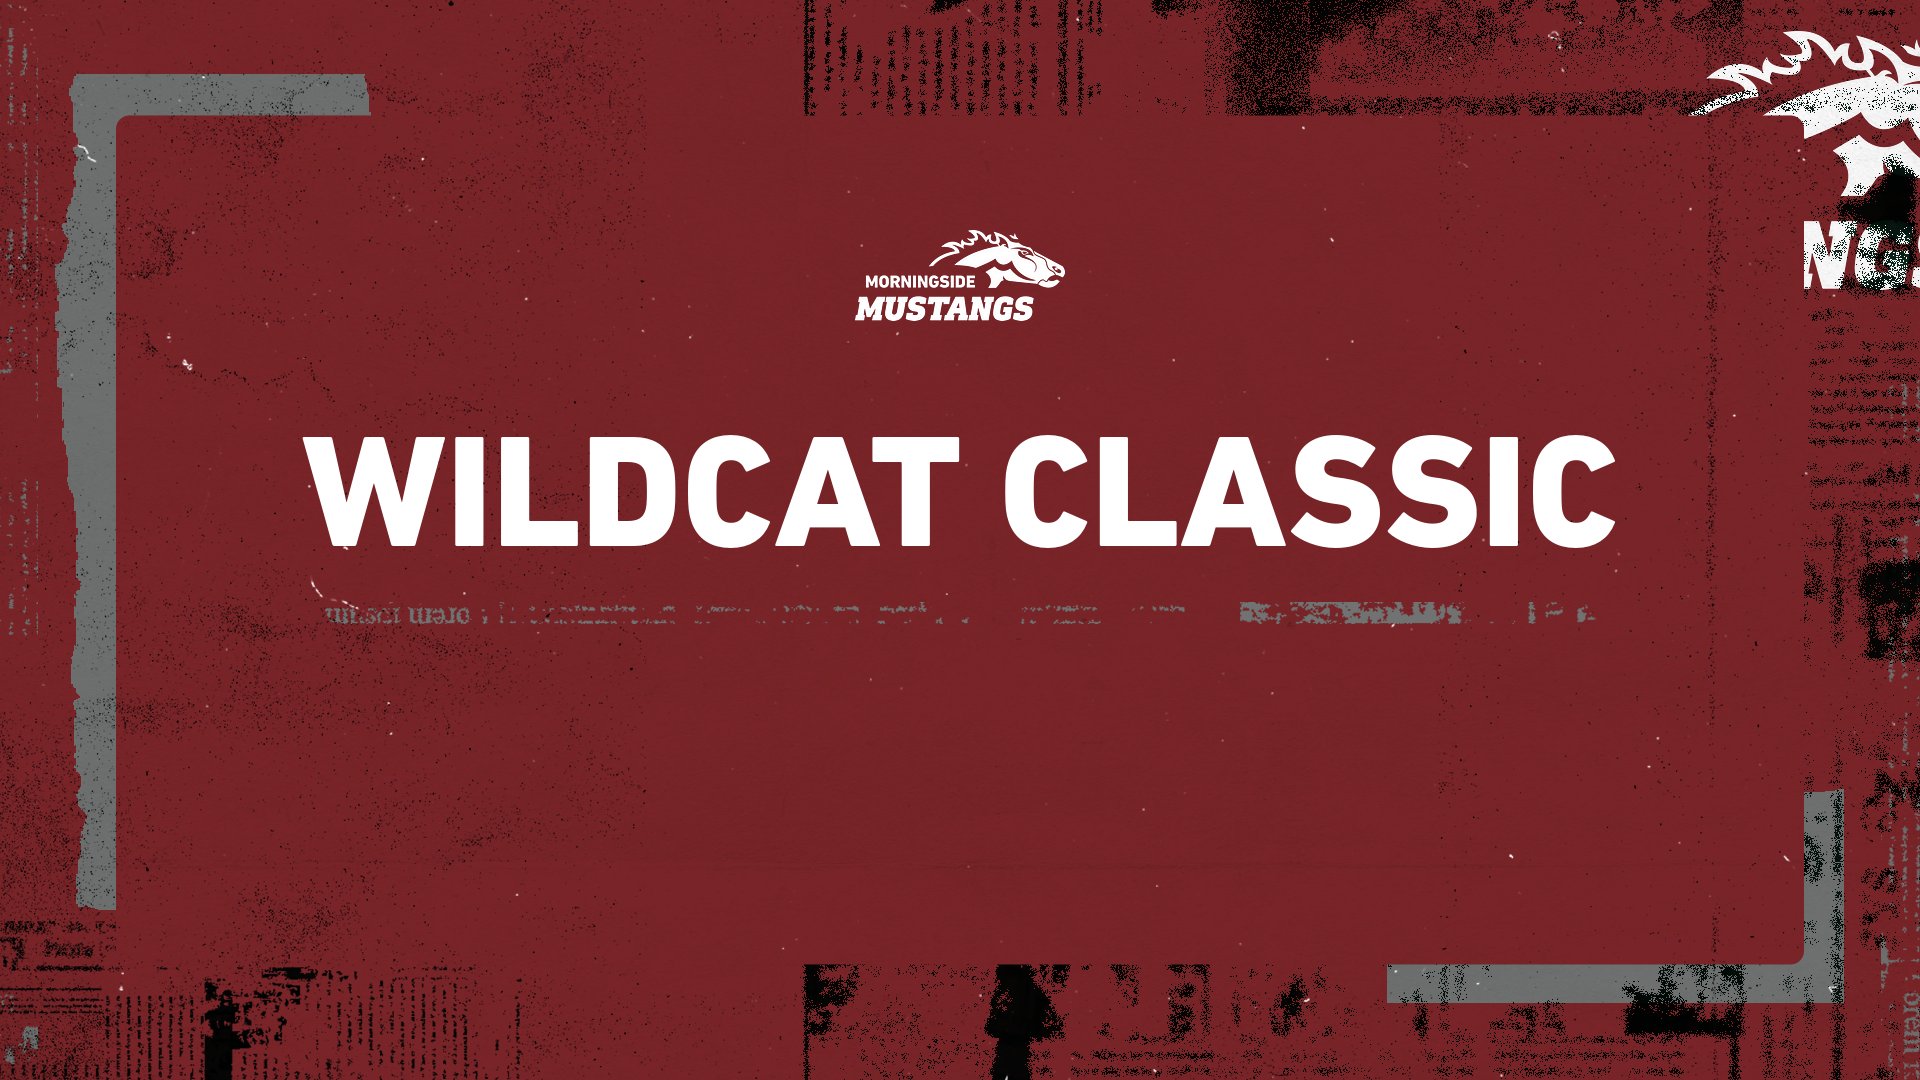 Mustangs place eighth at Wildcat Classic